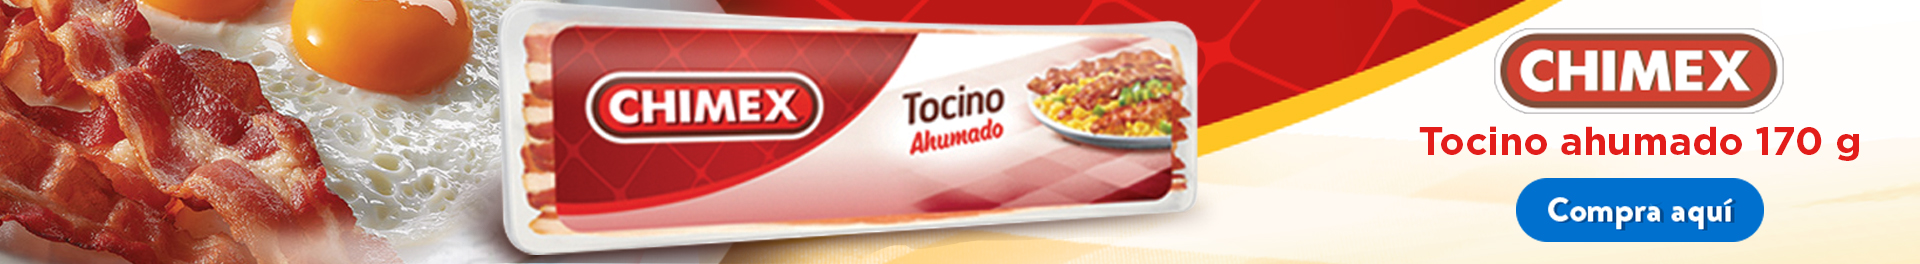 Productos Chimex